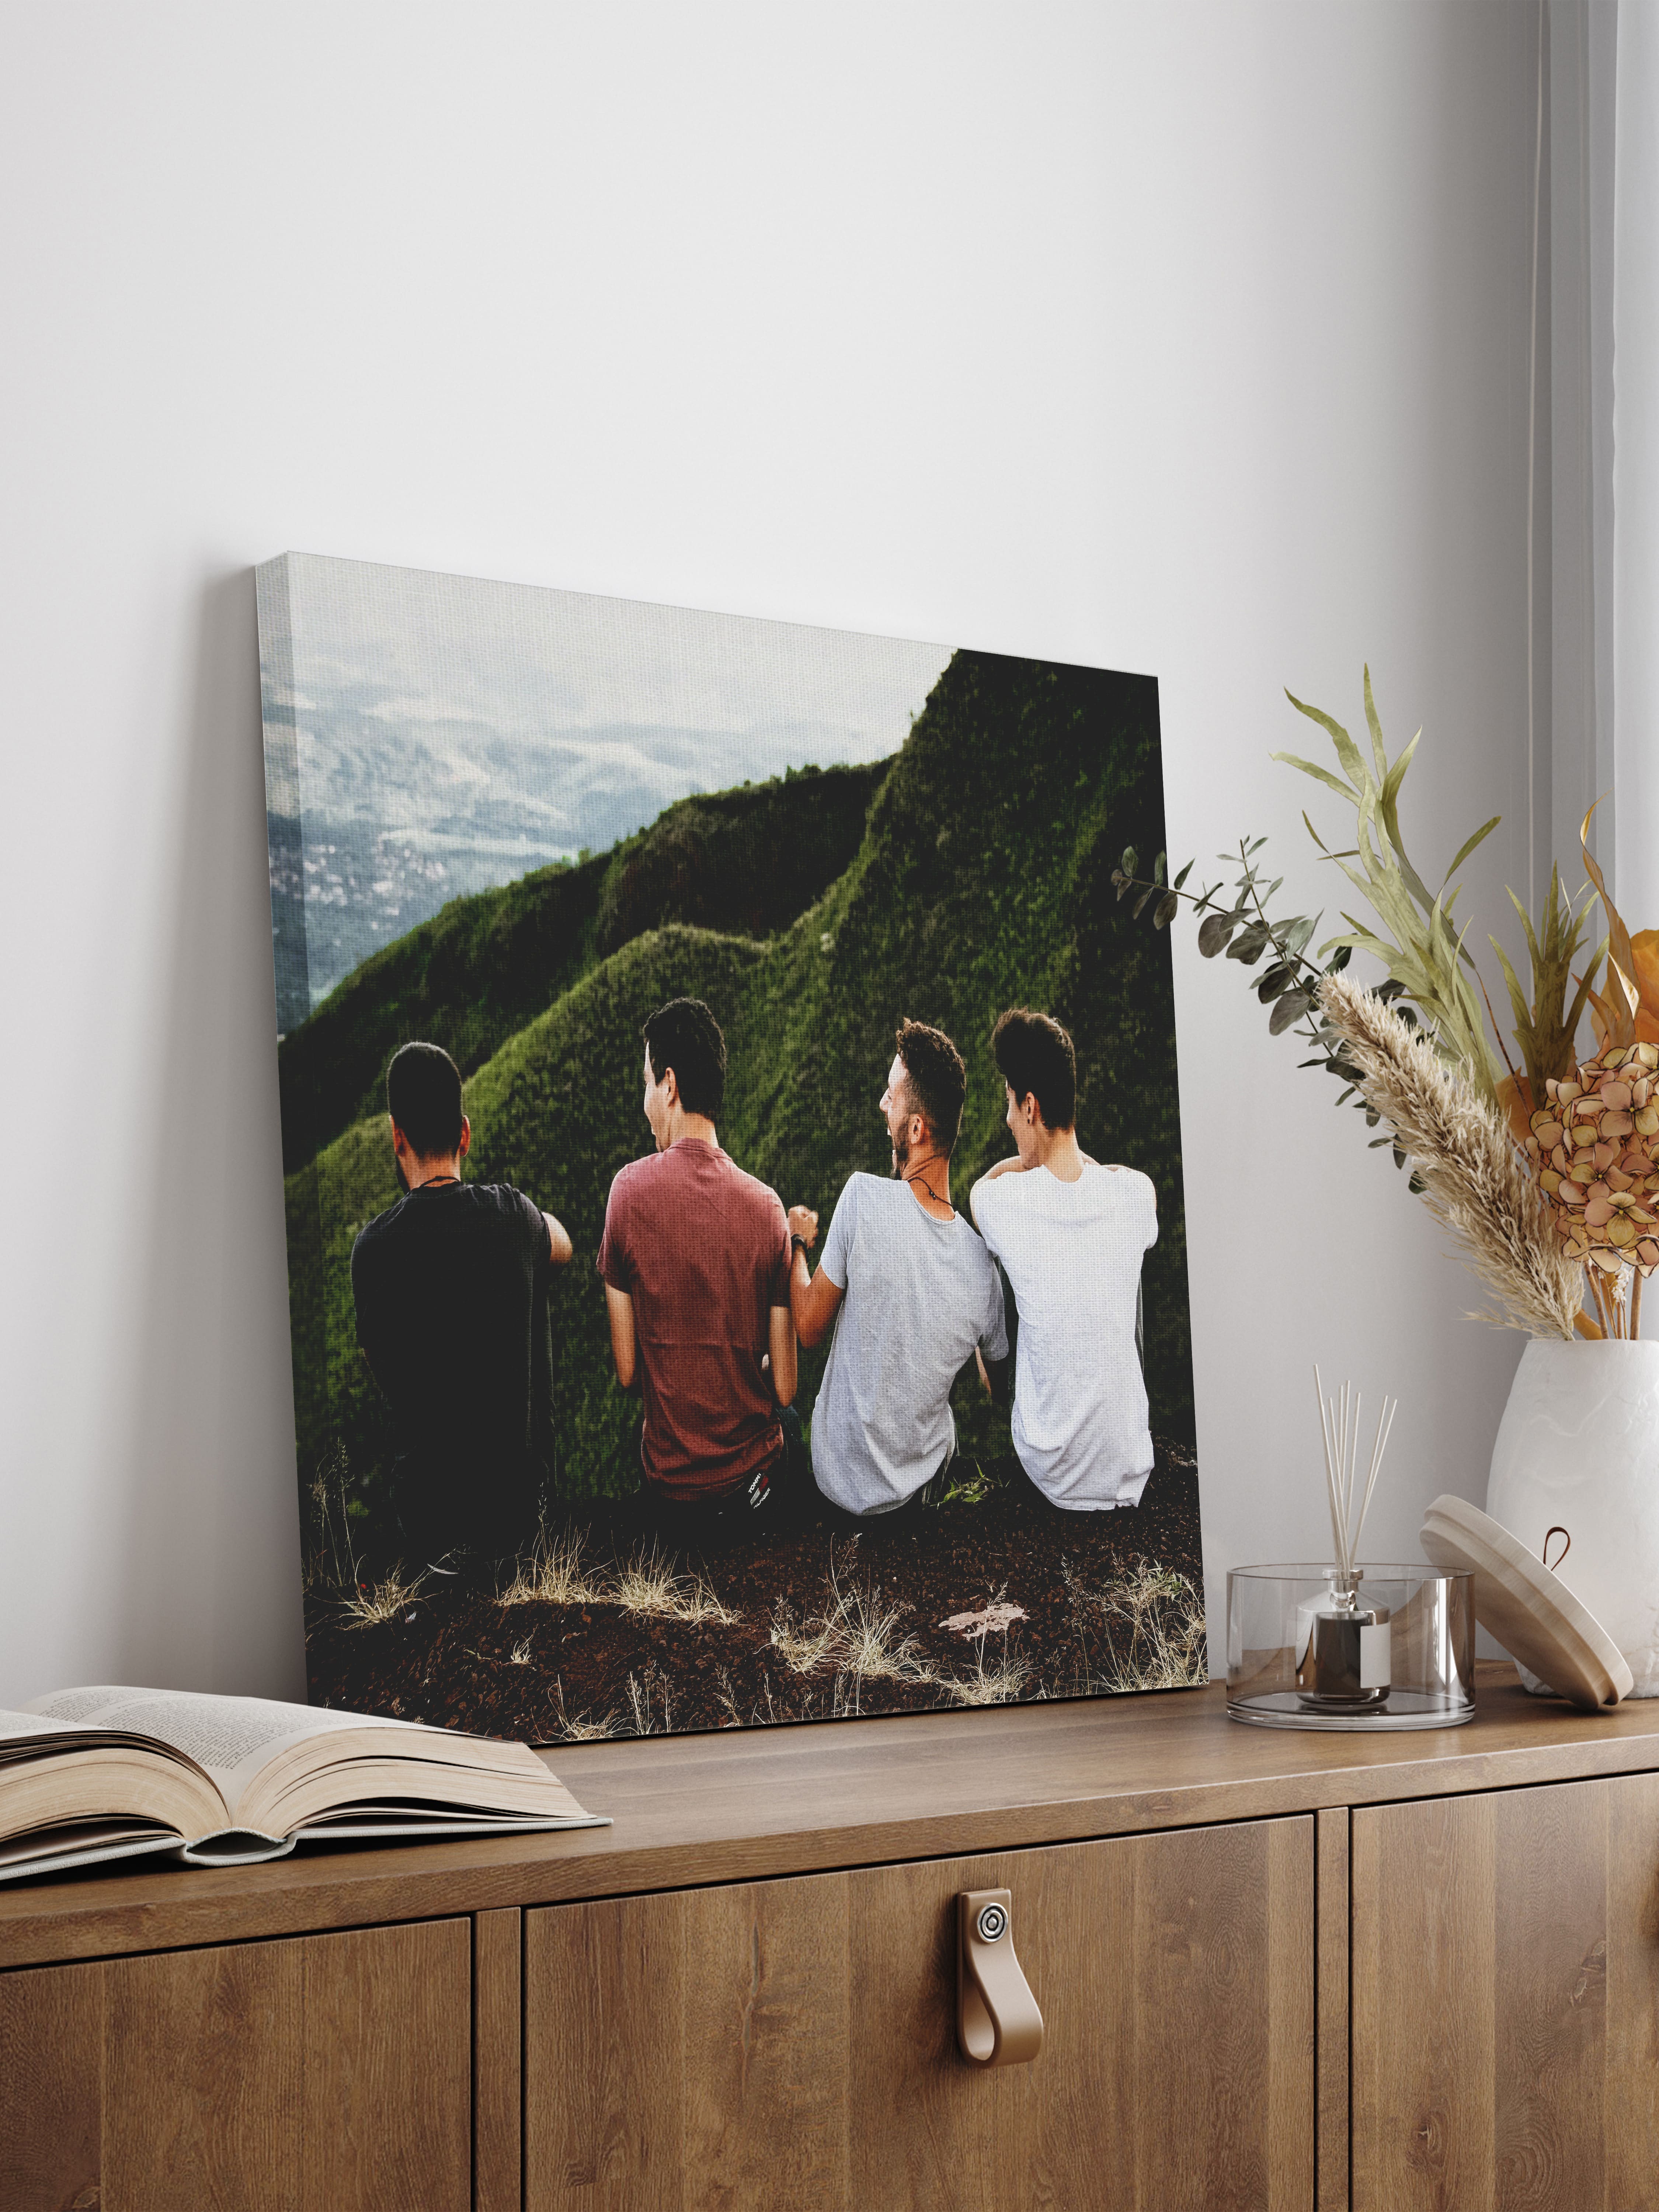 Canvas print on table of friends hanging out.